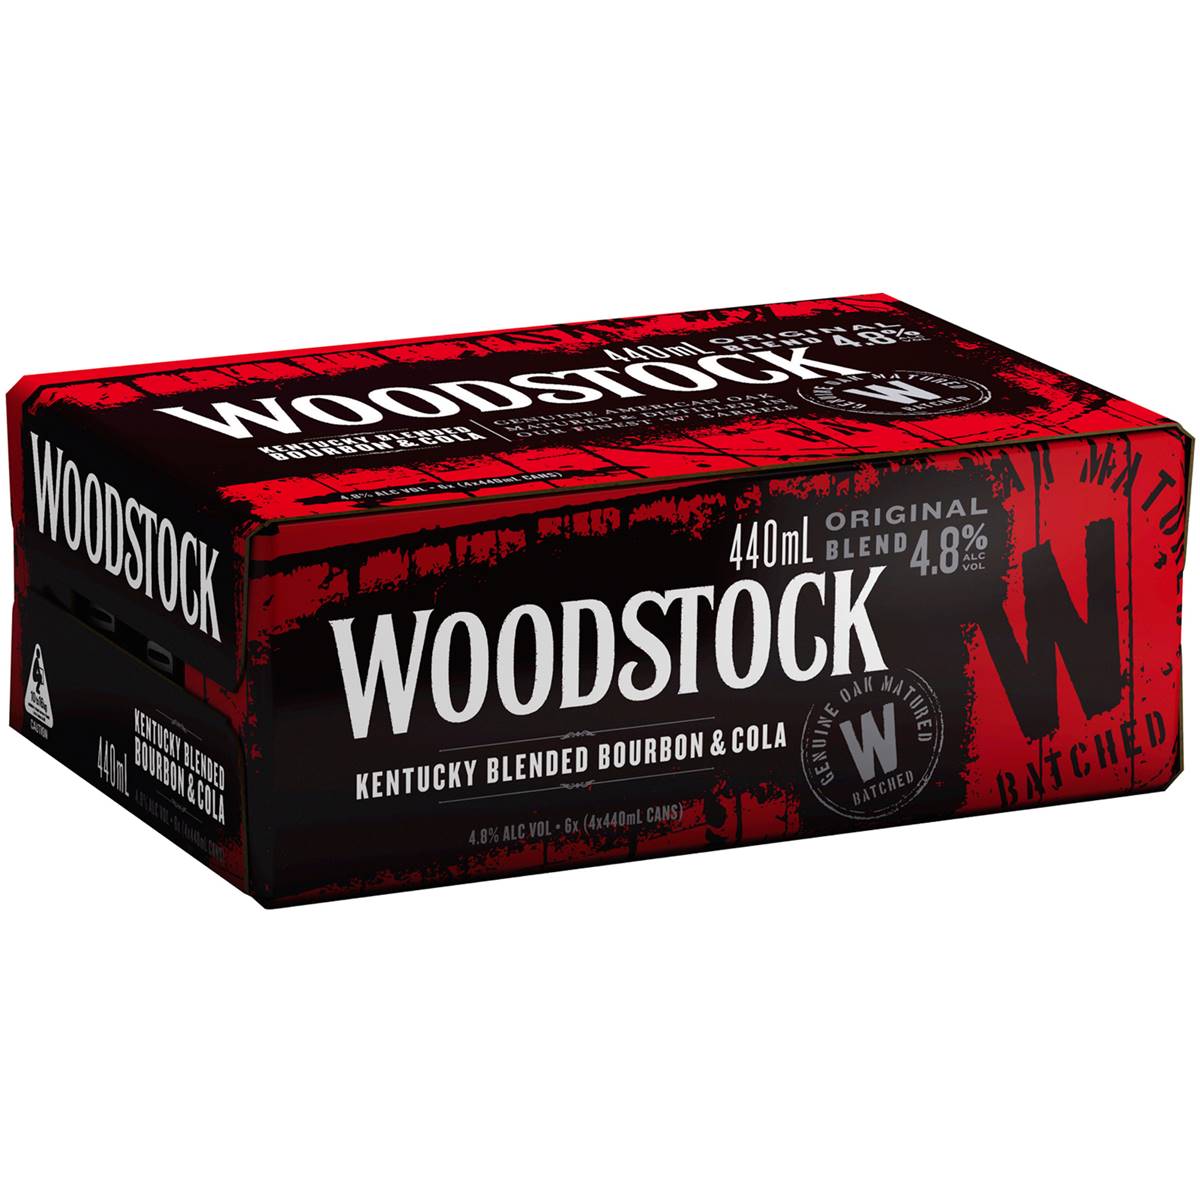 Calories in Woodstock Bourbon & Cola Cans